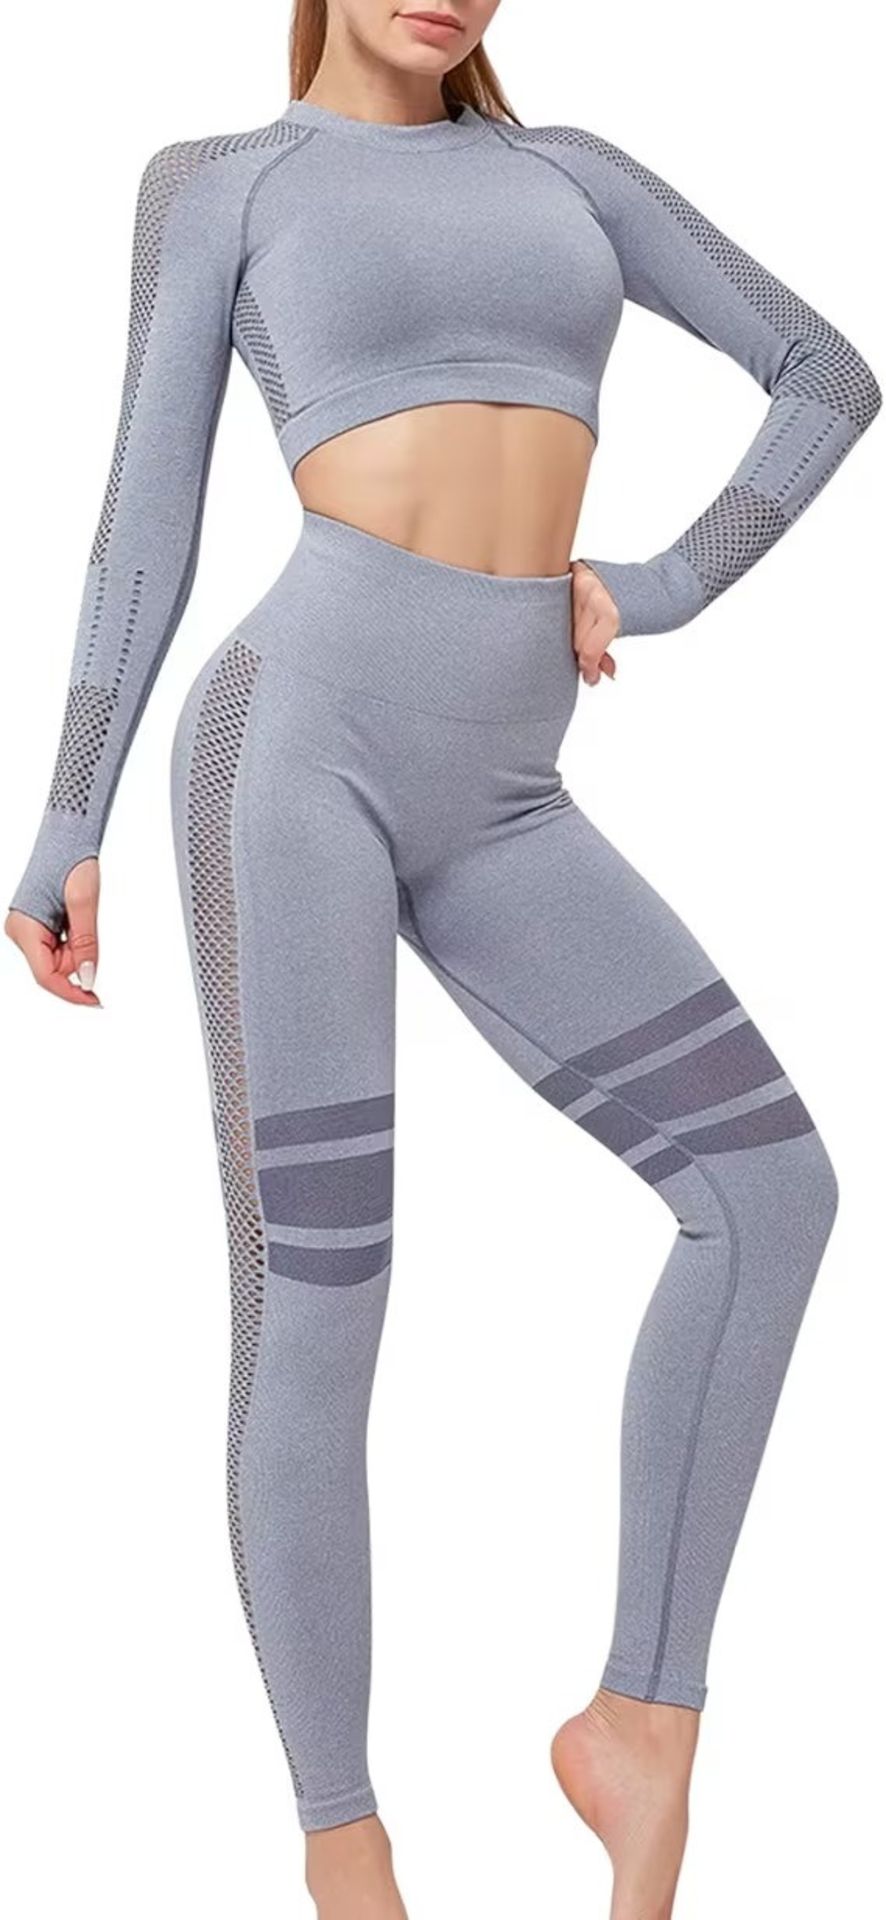 BRAND NEW Sport Outfit Set for Women Hollow-Out Crop Top + High Waist Fitness Legging